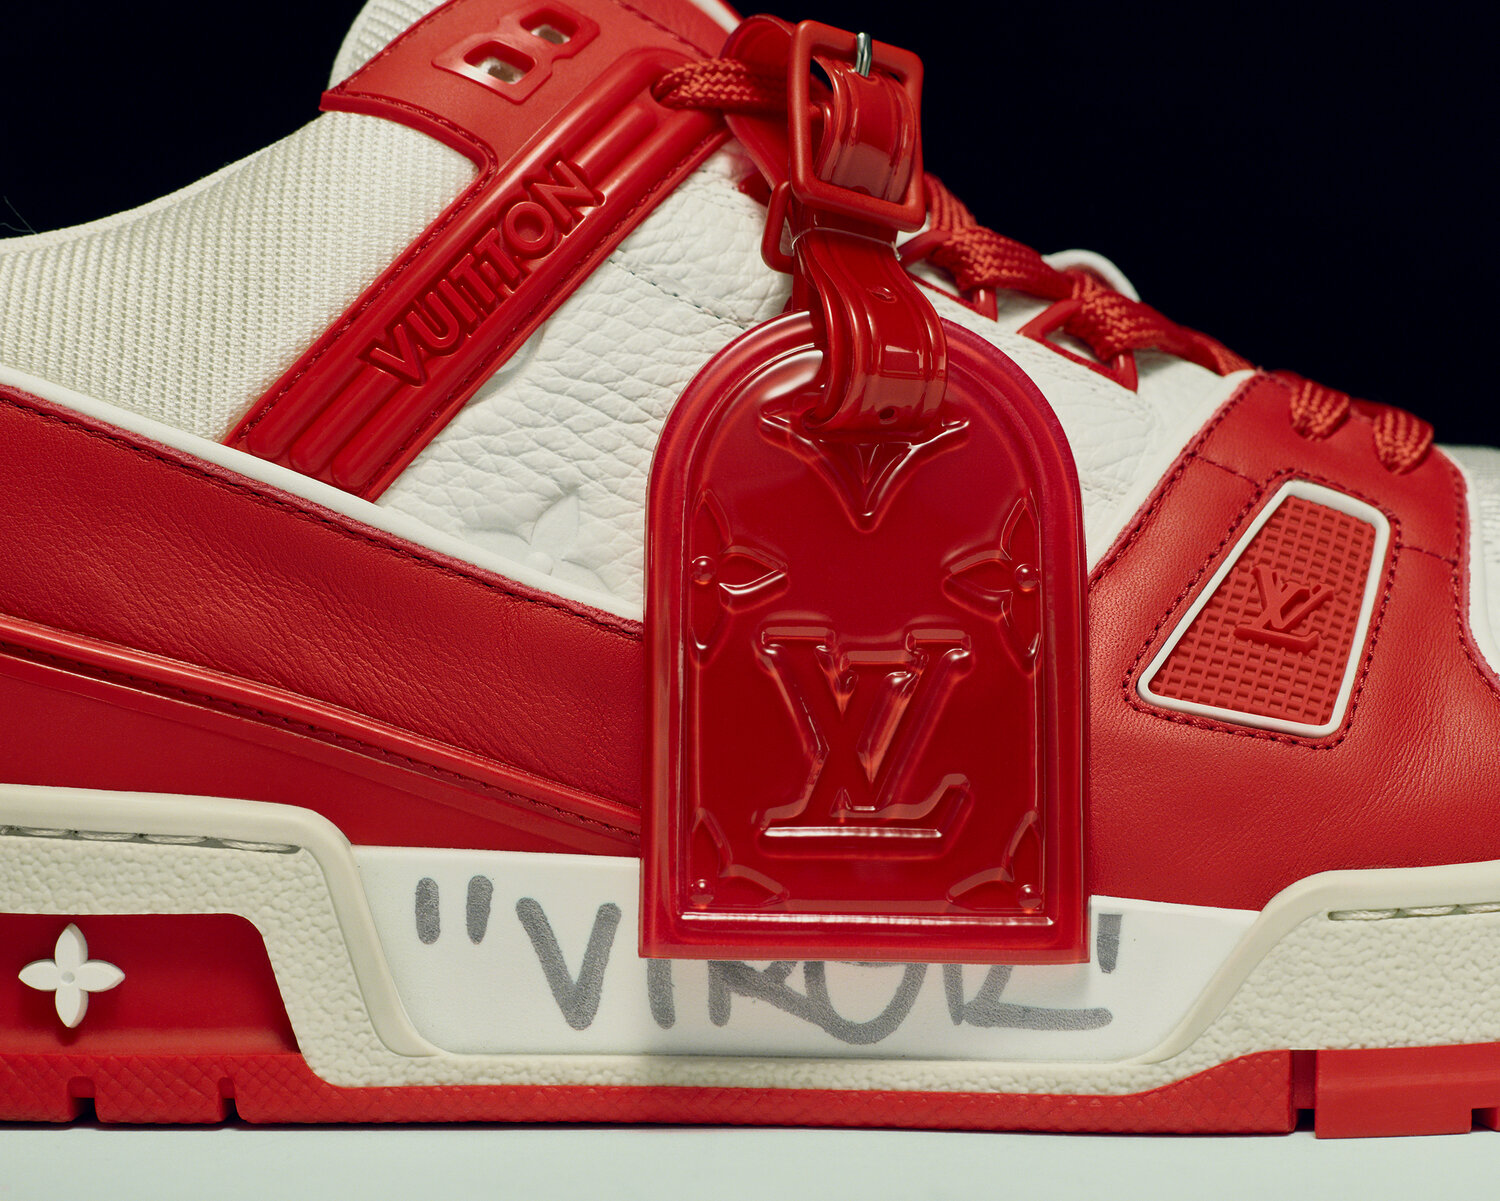 Virgil Abloh Signs (RED) LV Trainer Prototype for Sotheby's Auction